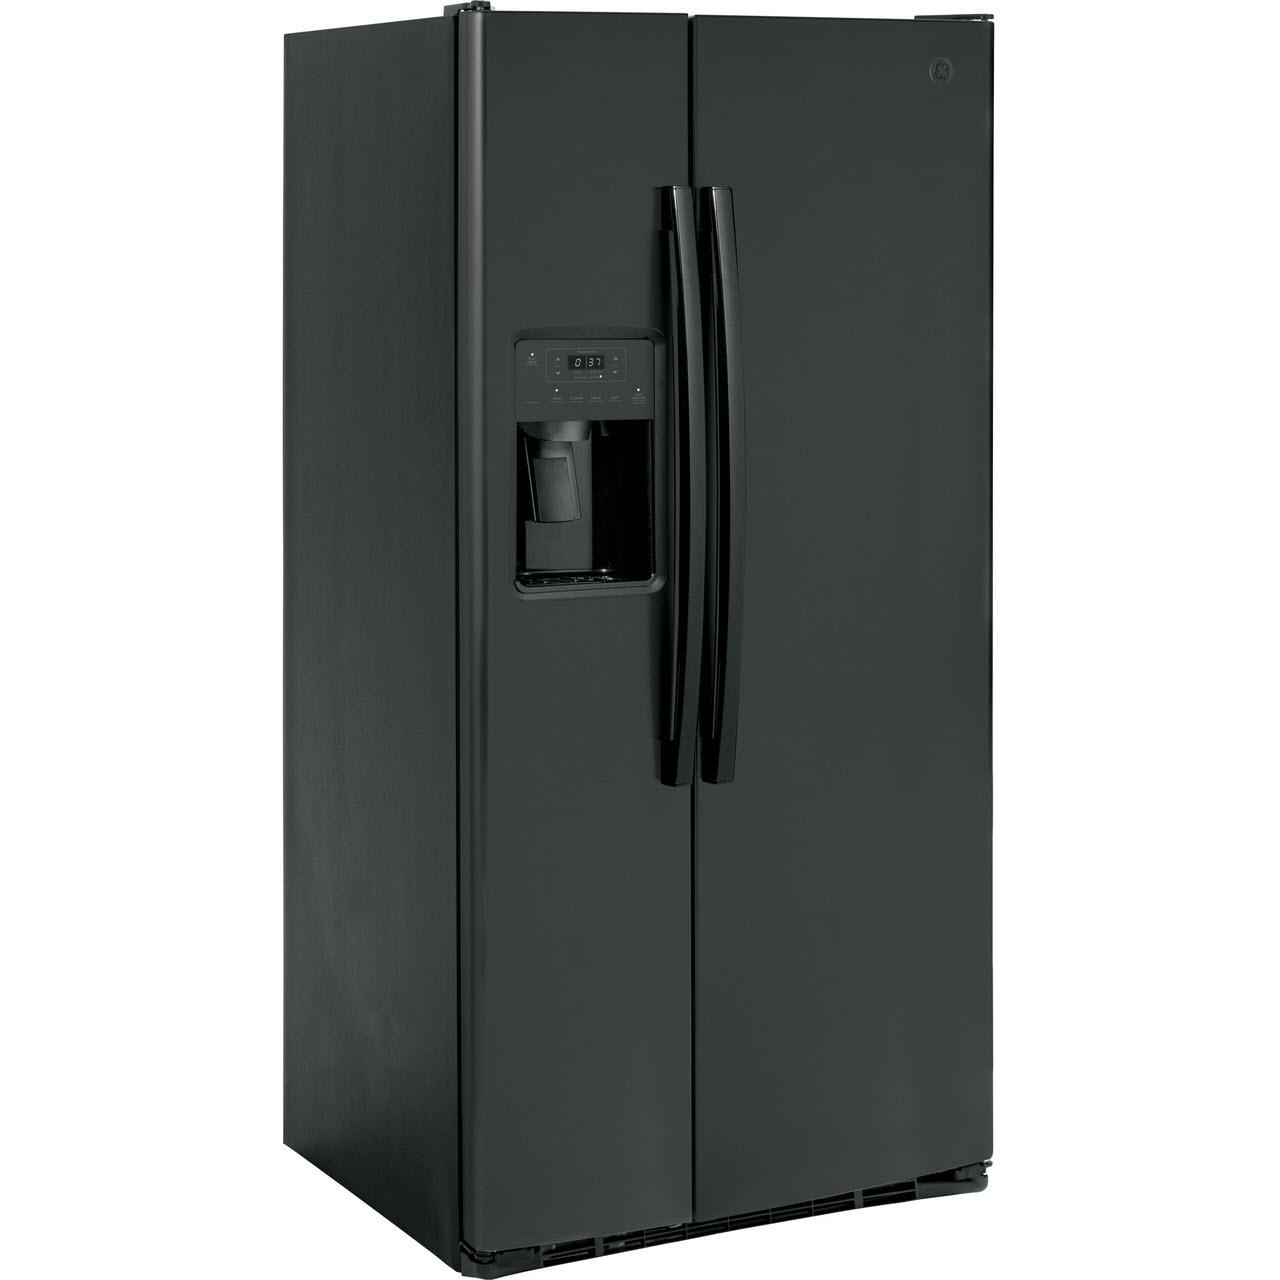 GE 33-inch 23 cu.ft. Freestanding Side-by-Side Refrigerator with LED Lighting GSE23GGPBB